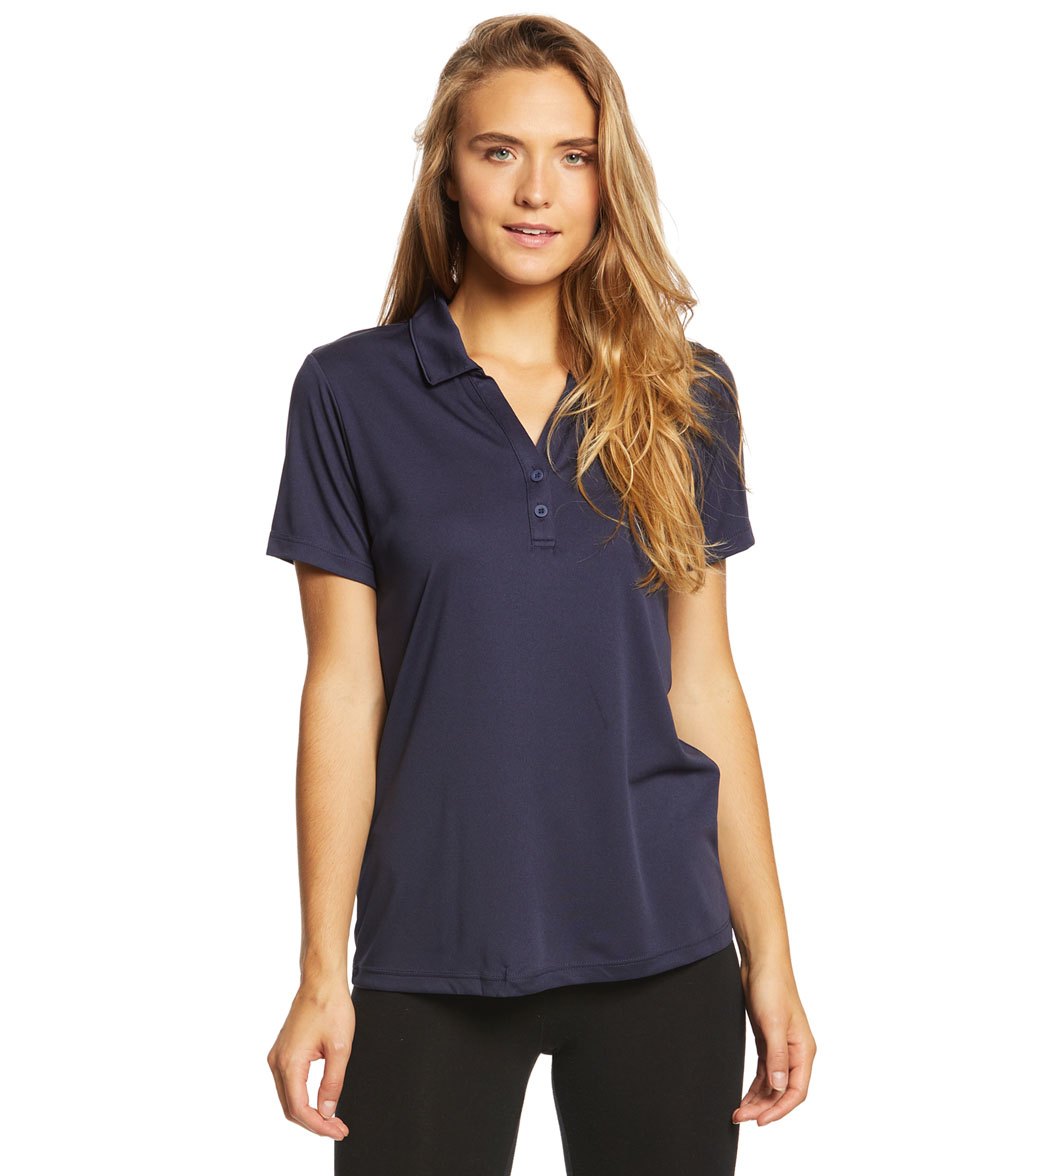 Women's Sport-Tek Posicharge Competitortm Polo - True Navy Large Polyester - Swimoutlet.com